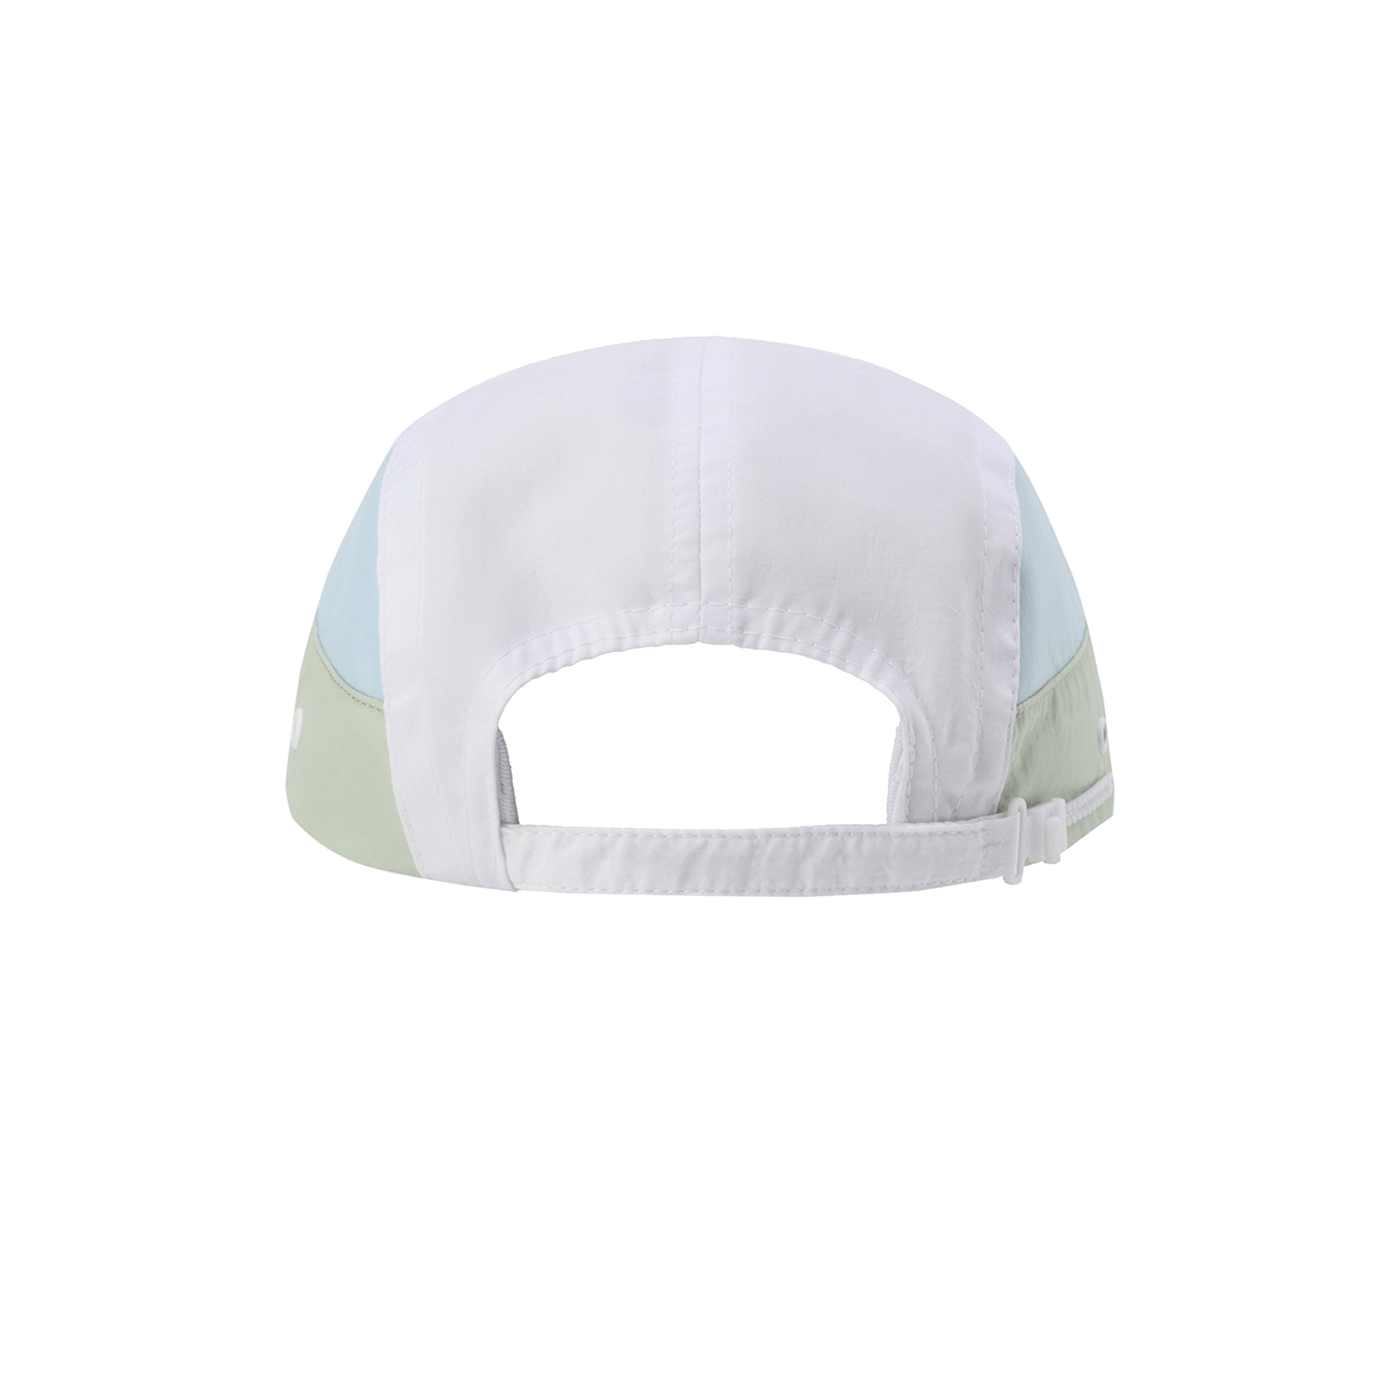 Hélas Limited Locking Cap White